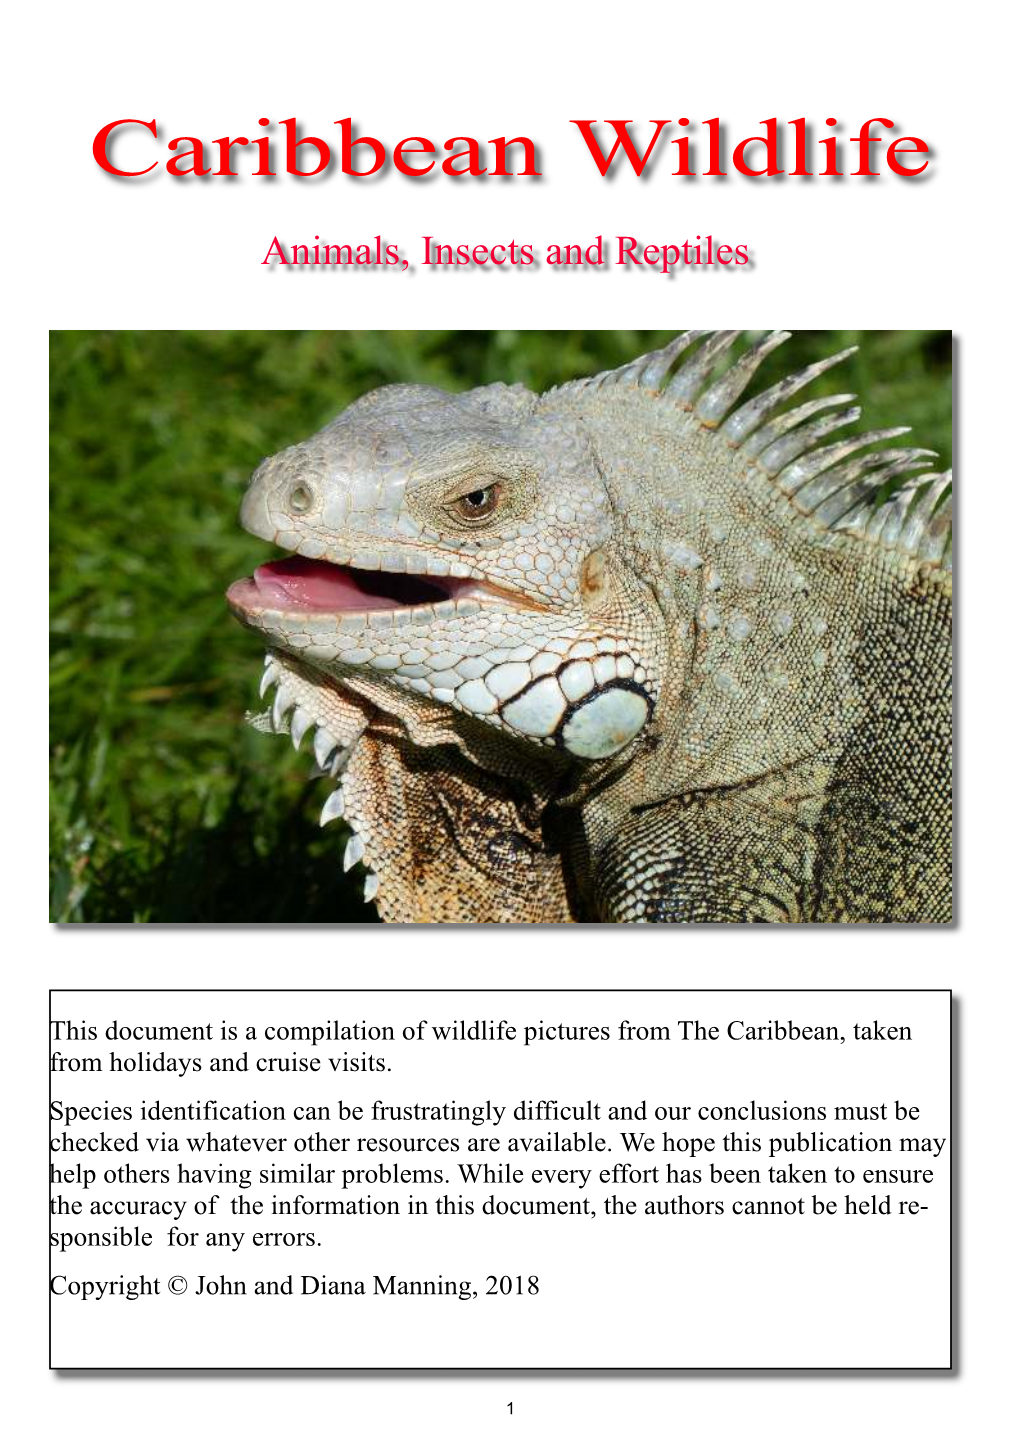 Caribbean Wildlife Animals and Insects